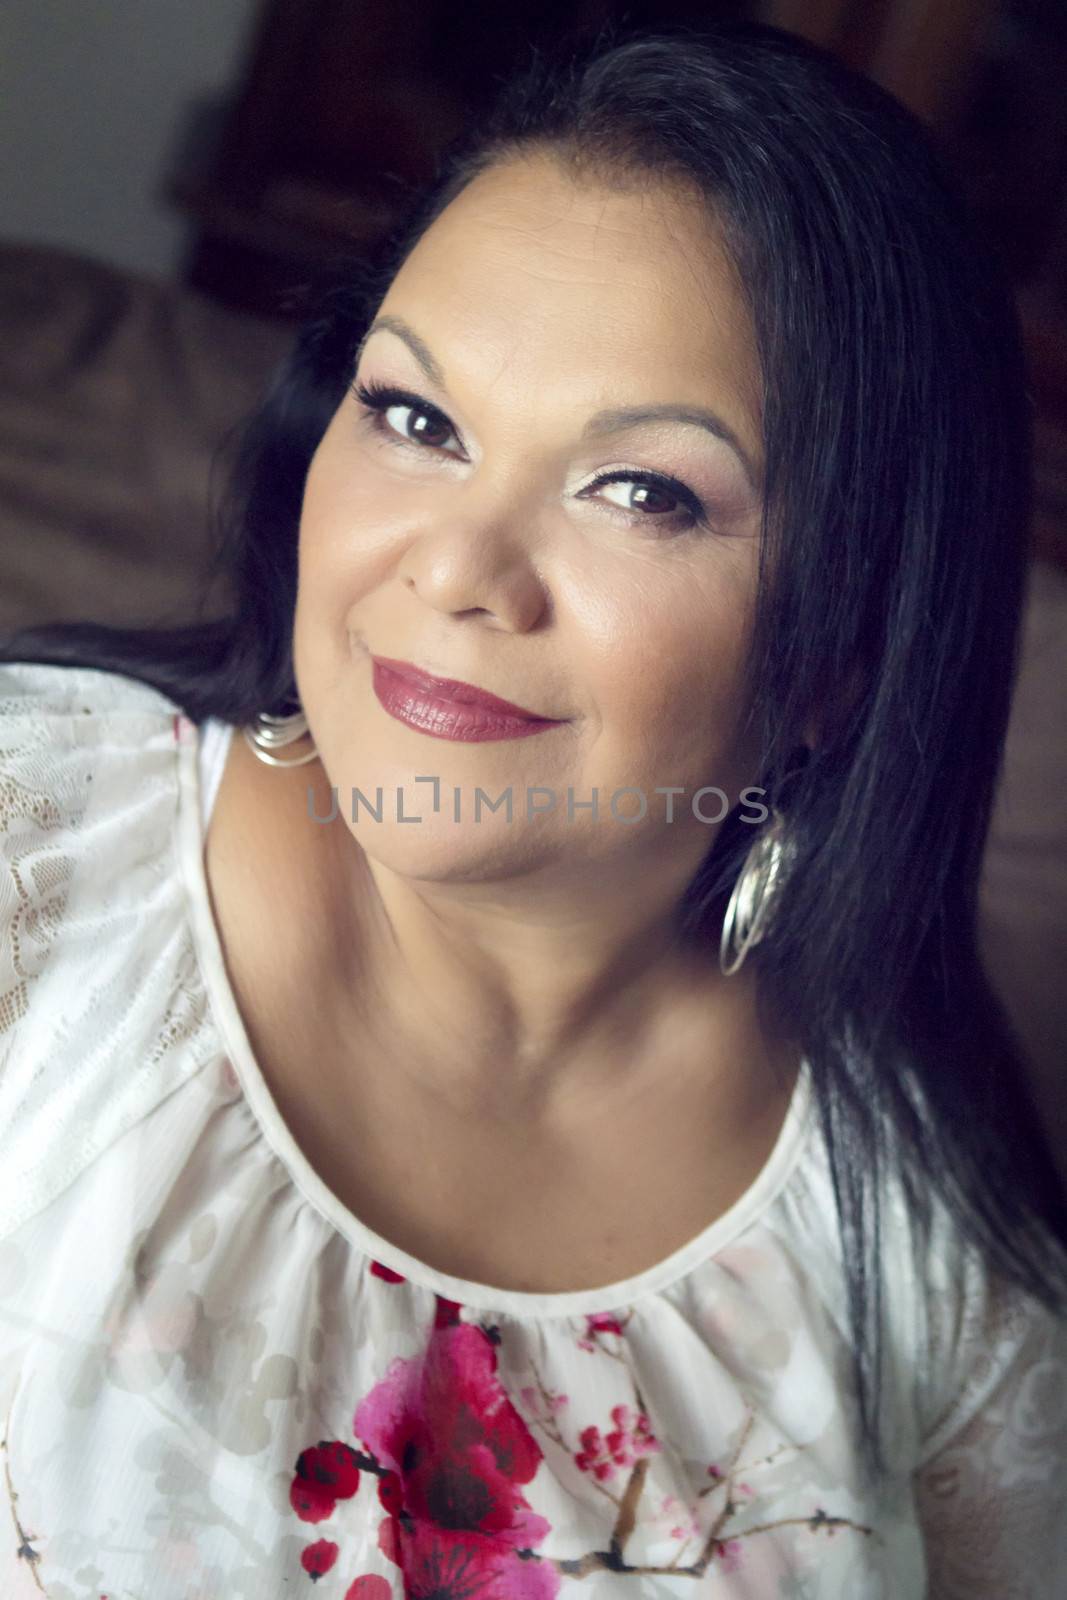 Close up portrait of a pretty hispanic woman in her 50s